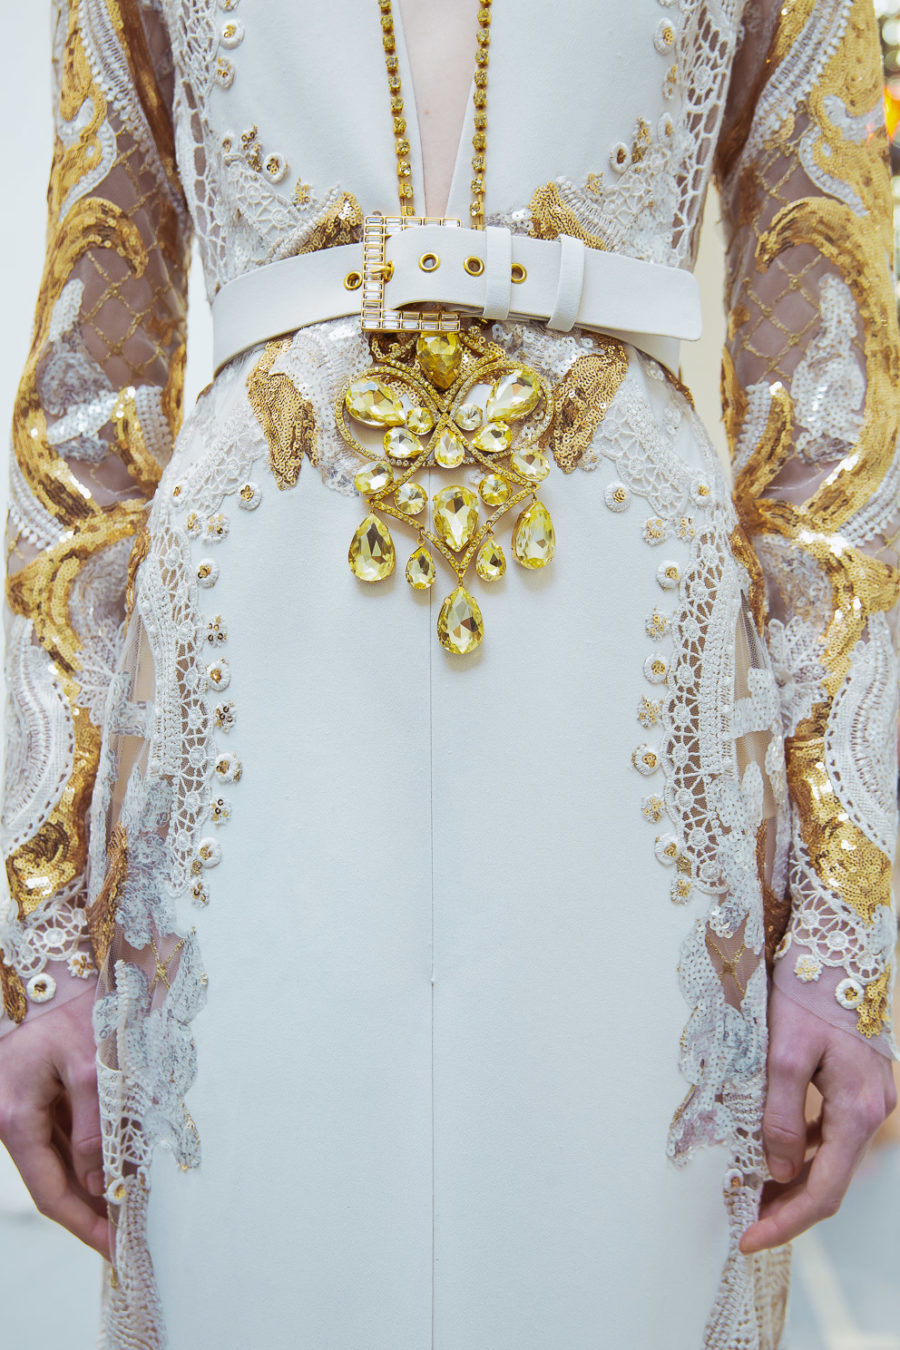 SPREAD THE WORD: AN HAUTE COUTURE DIARY SS20 | VOGUE GREECE | FILEP MOTWARY